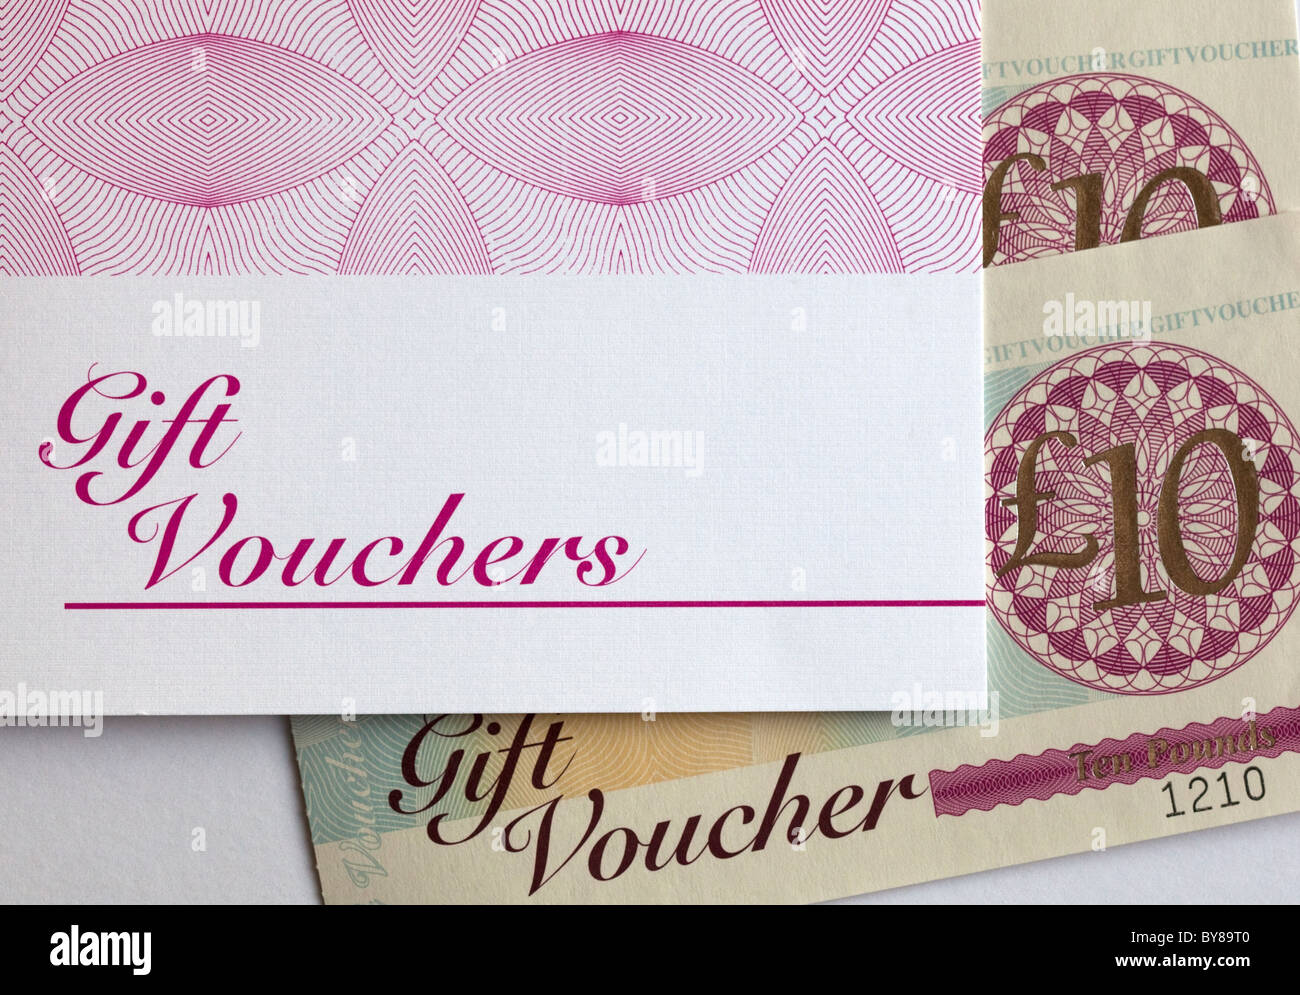 Vouchers High Resolution Stock Photography And Images Alamy